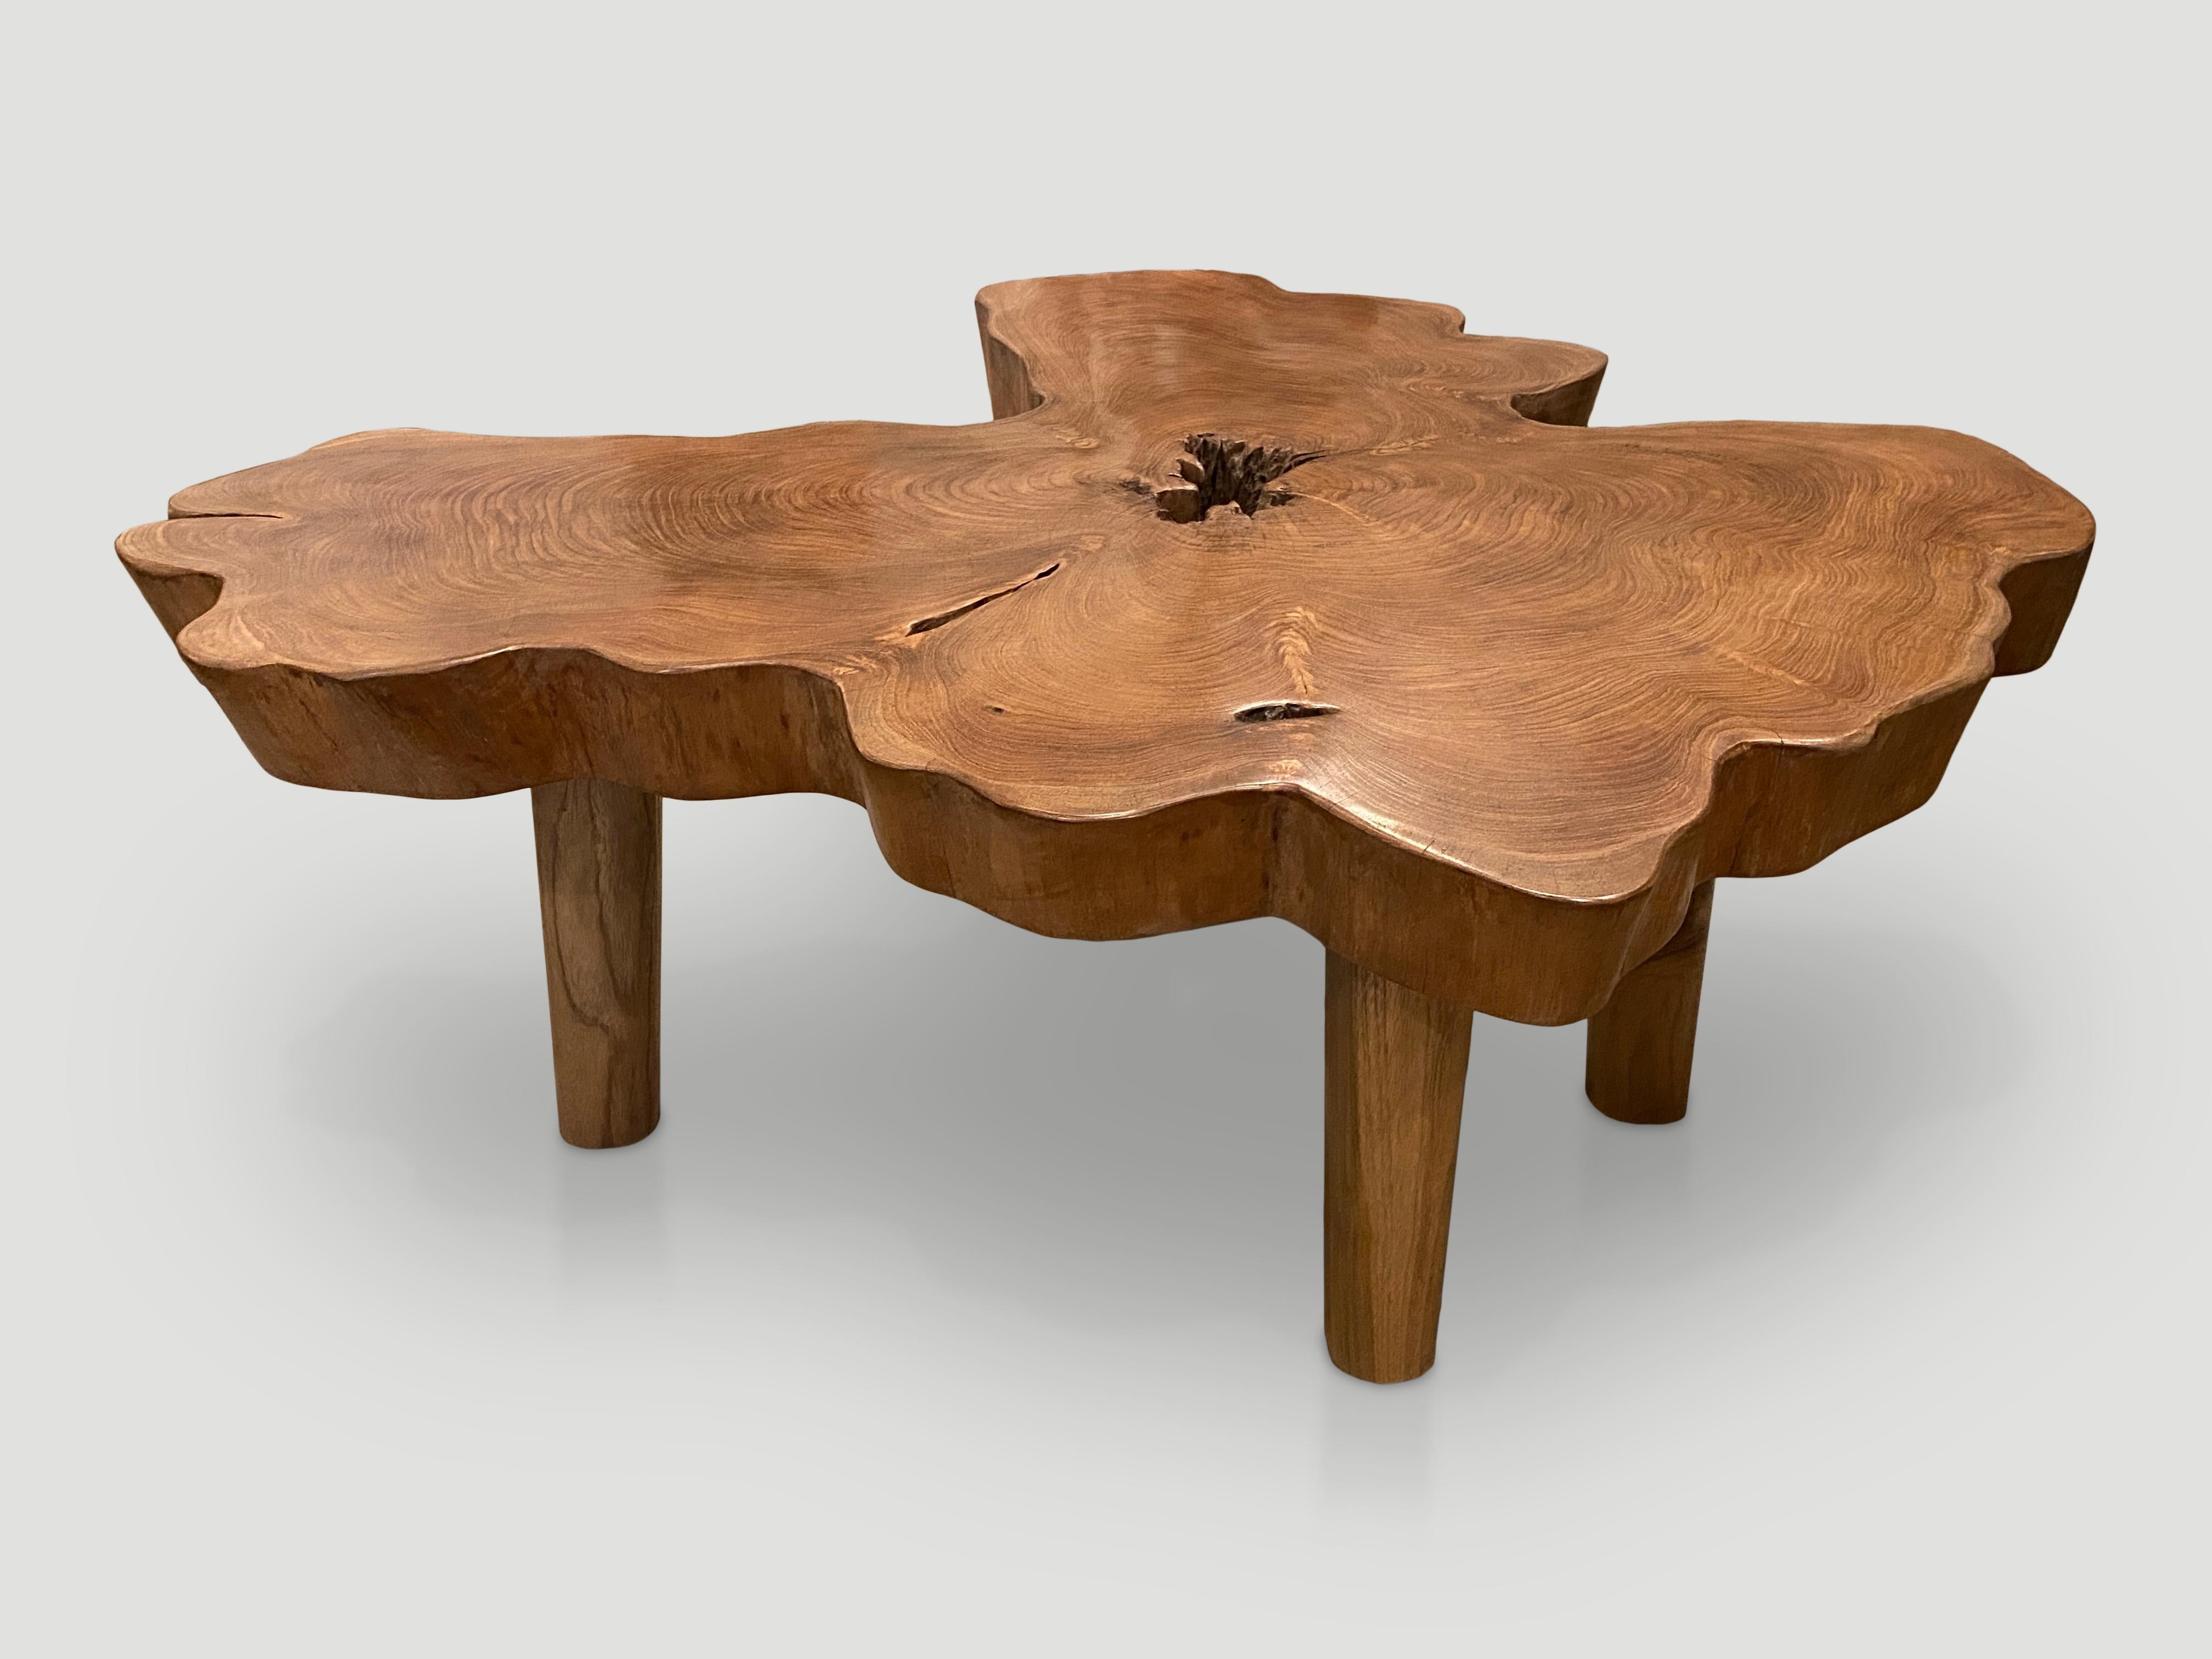 Impressive three inch single slab live edge teak coffee table. This beautiful butterfly shape is set on minimalist legs. Finished with a natural oil revealing the beautiful wood grain.

Own an Andrianna Shamaris original.

Andrianna Shamaris.